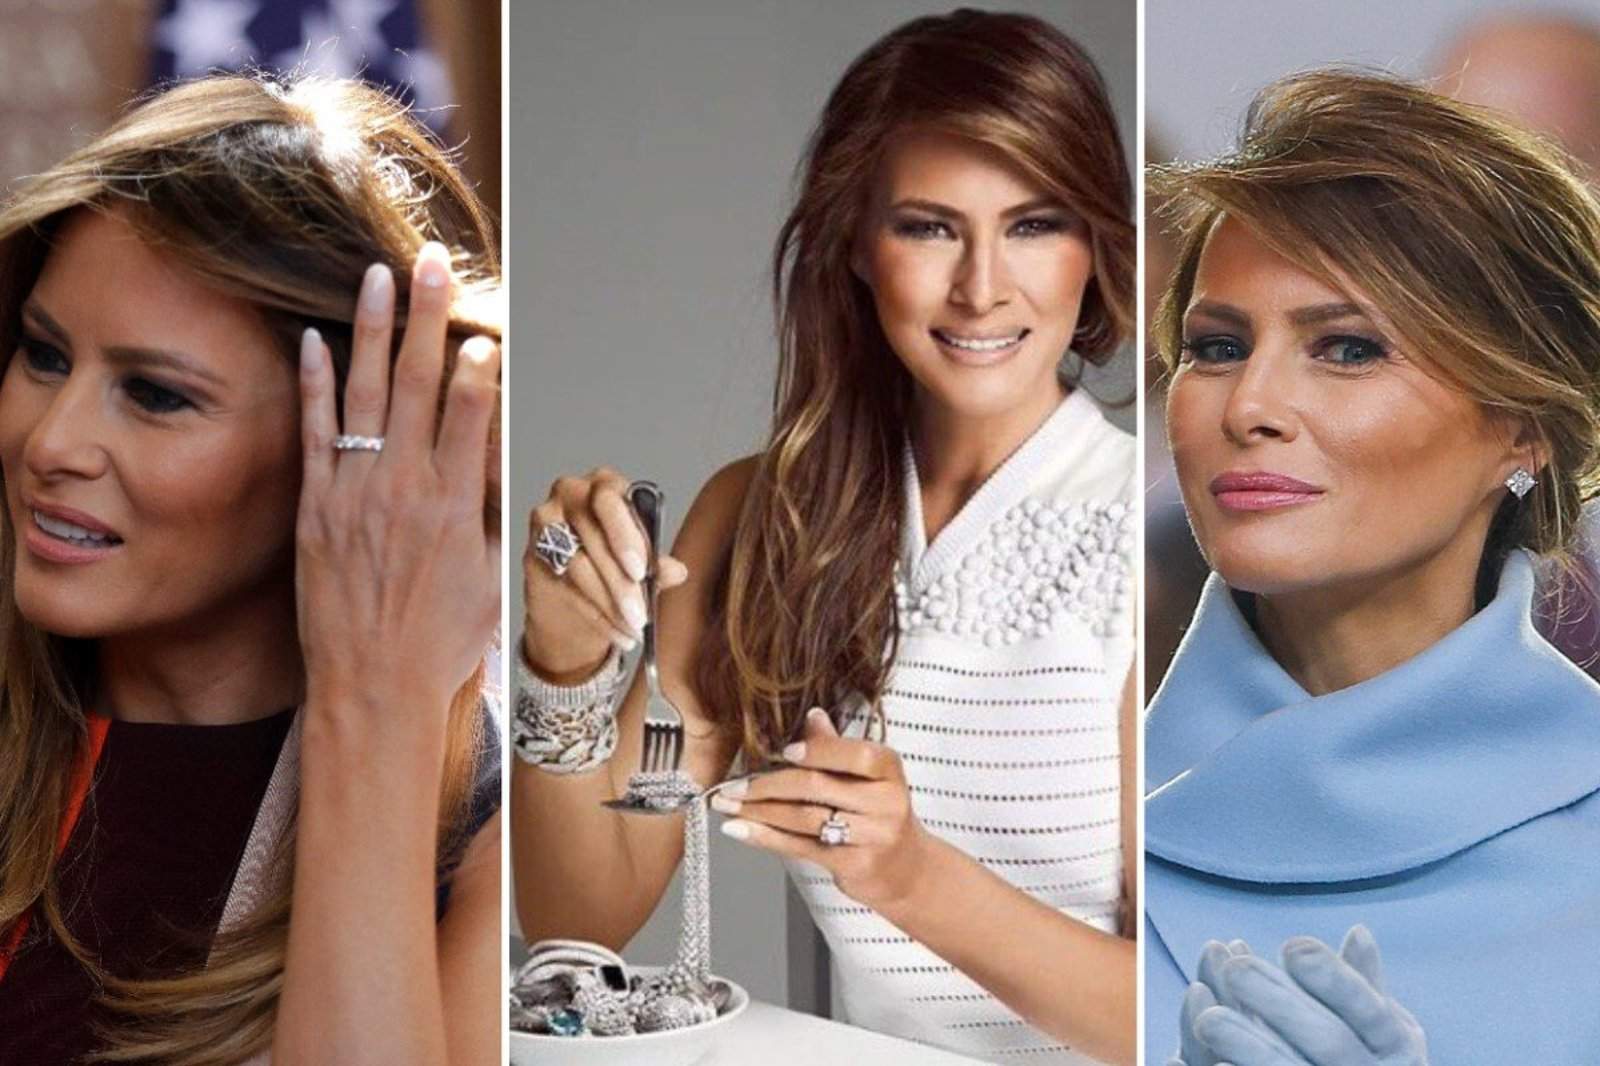 A look inside Melania Trump’s extravagant jewelry collection – From beloved husband Donald Trump’s $3 million wedding band to her Van Cleef & Arpels diamond earrings she wore for the 2017 White House inauguration.